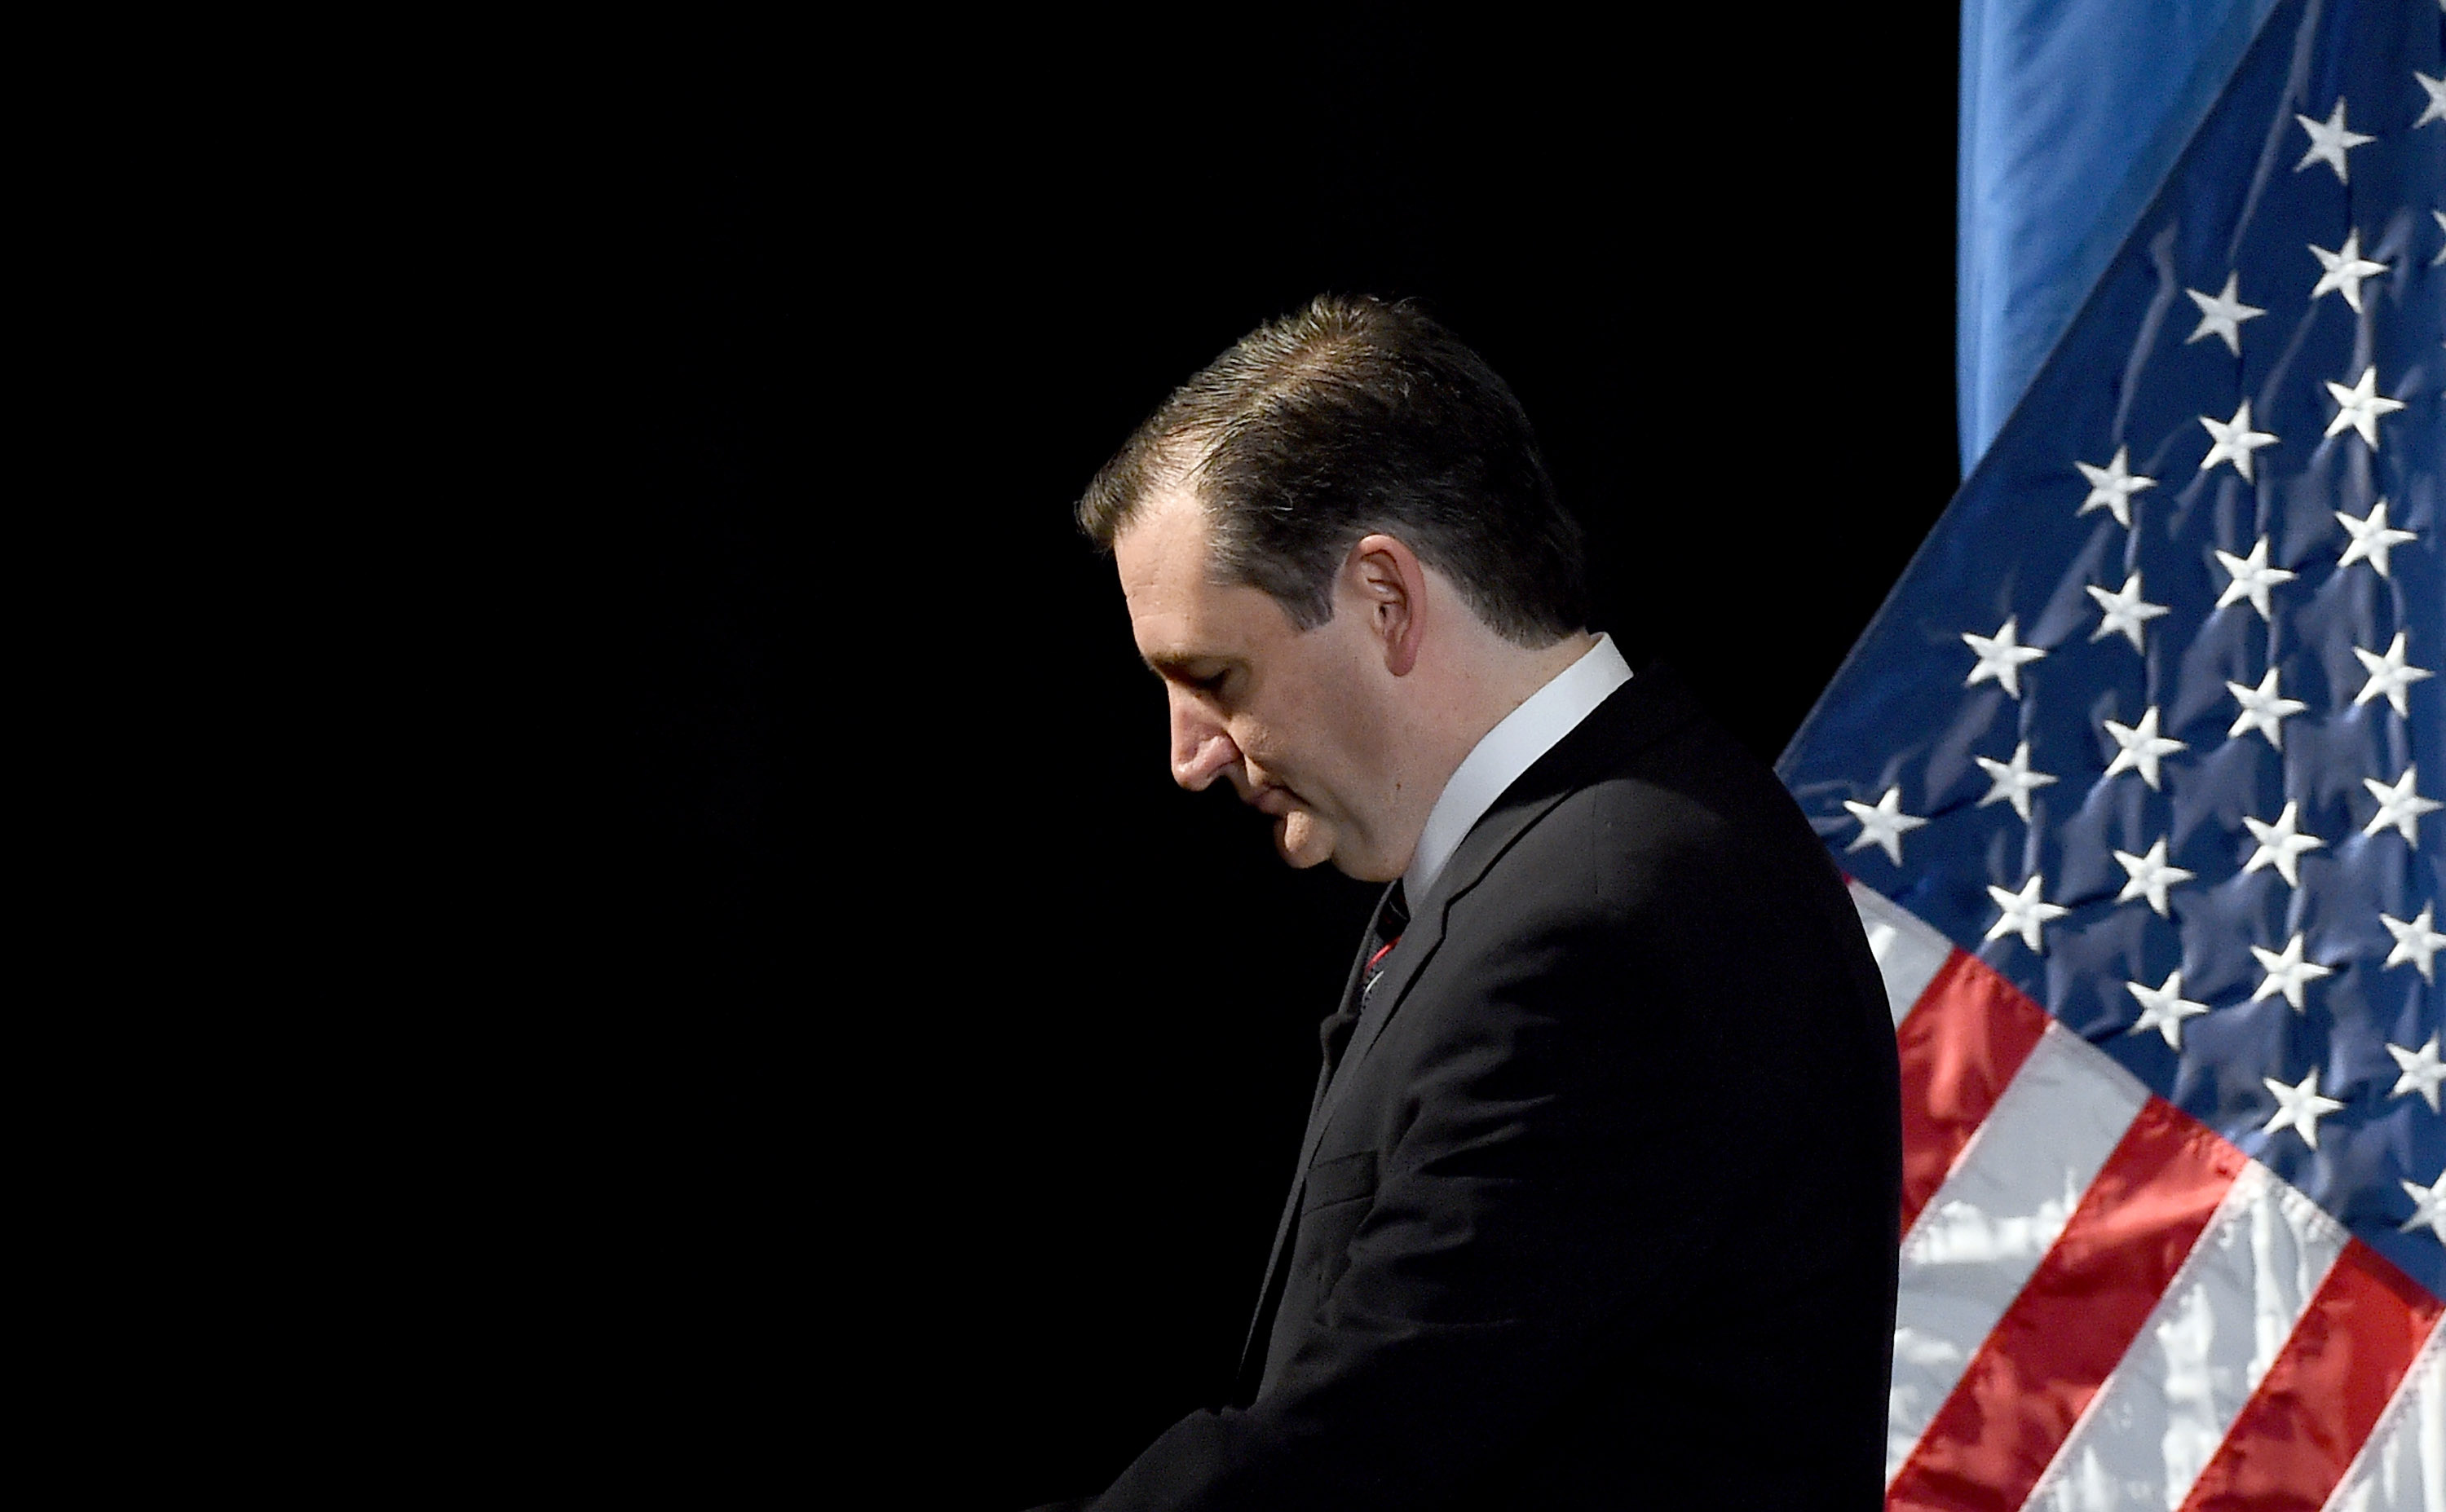 Republican presidential candidate U.S. Sen. Ted Cruz  leaves the stage after speaking during the Republican Jewish Coalition spring leadership meeting at The Venetian Las Vegas on April 25, 2015 in Las Vegas, Nevada. (Ethan Mille—Getty Images)